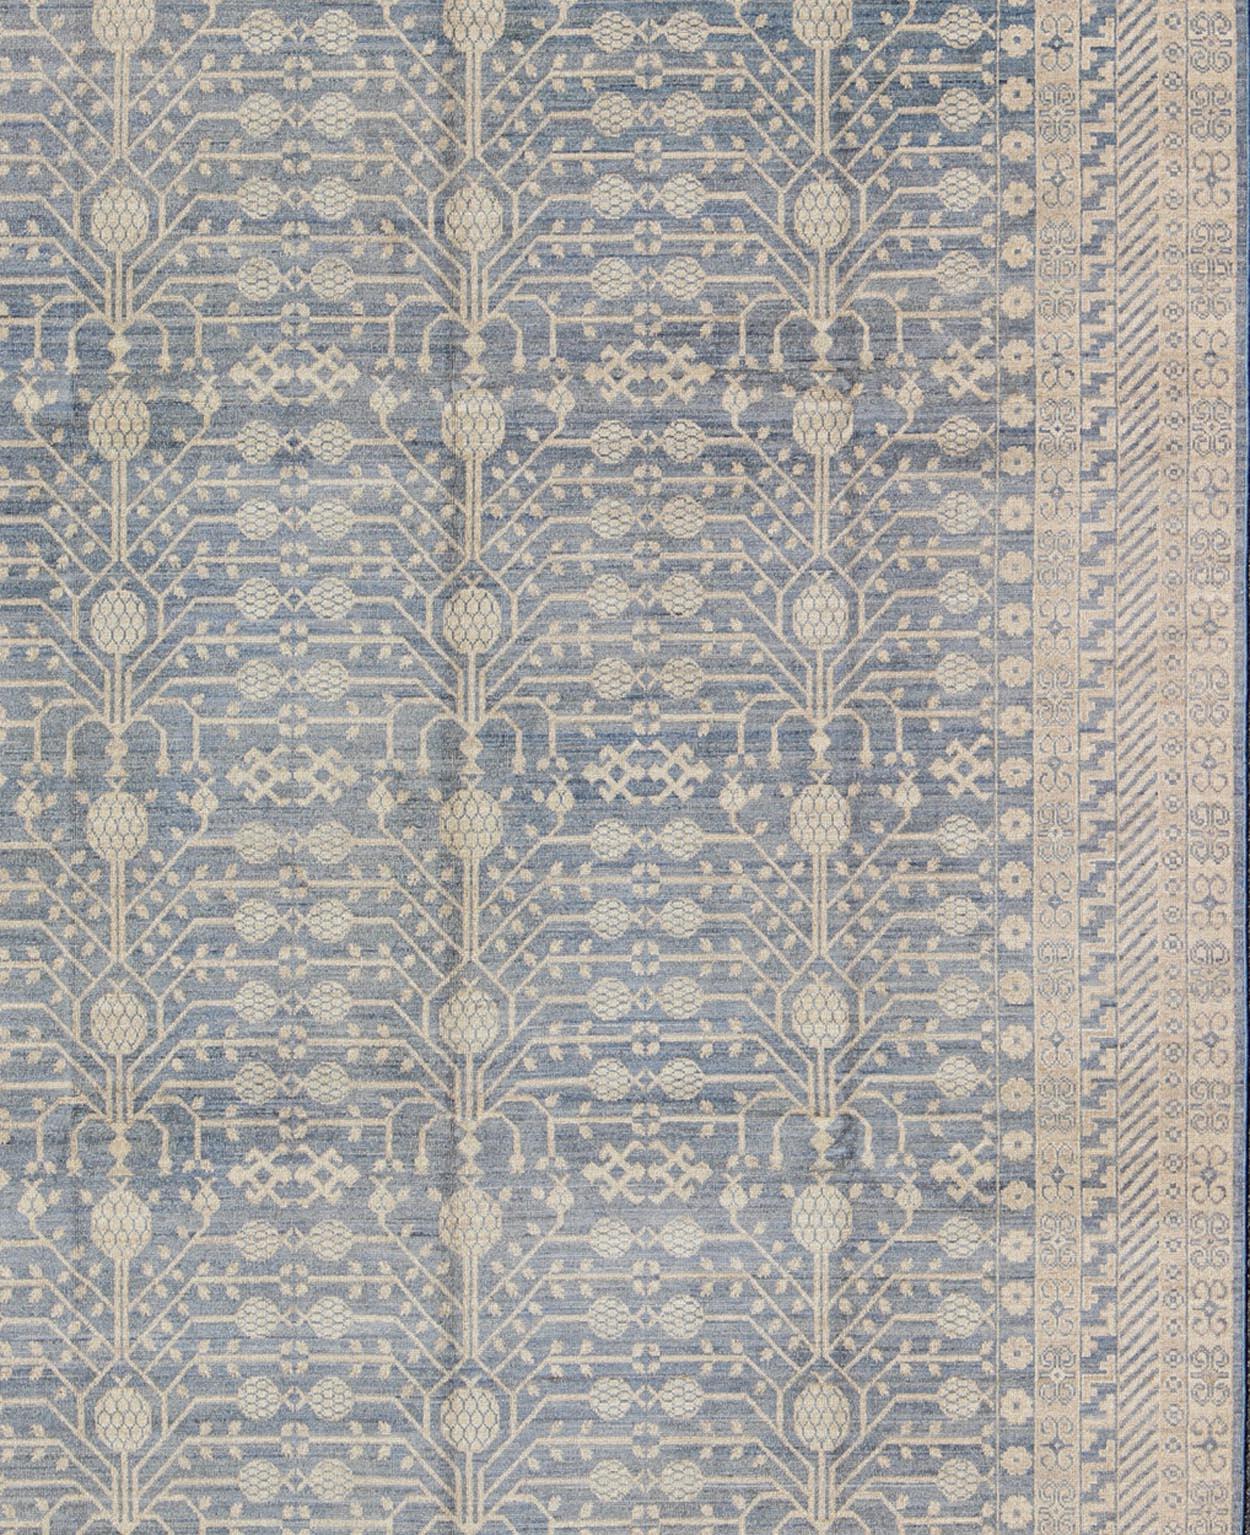 This Khotan features an all-over design flanked by a repeating pattern in the border with Asian Motifs. The entirety of the piece is rendered in light tones, which makes it a versatile rug, well-suited for a variety of interiors.

Measures: 8'11'' x